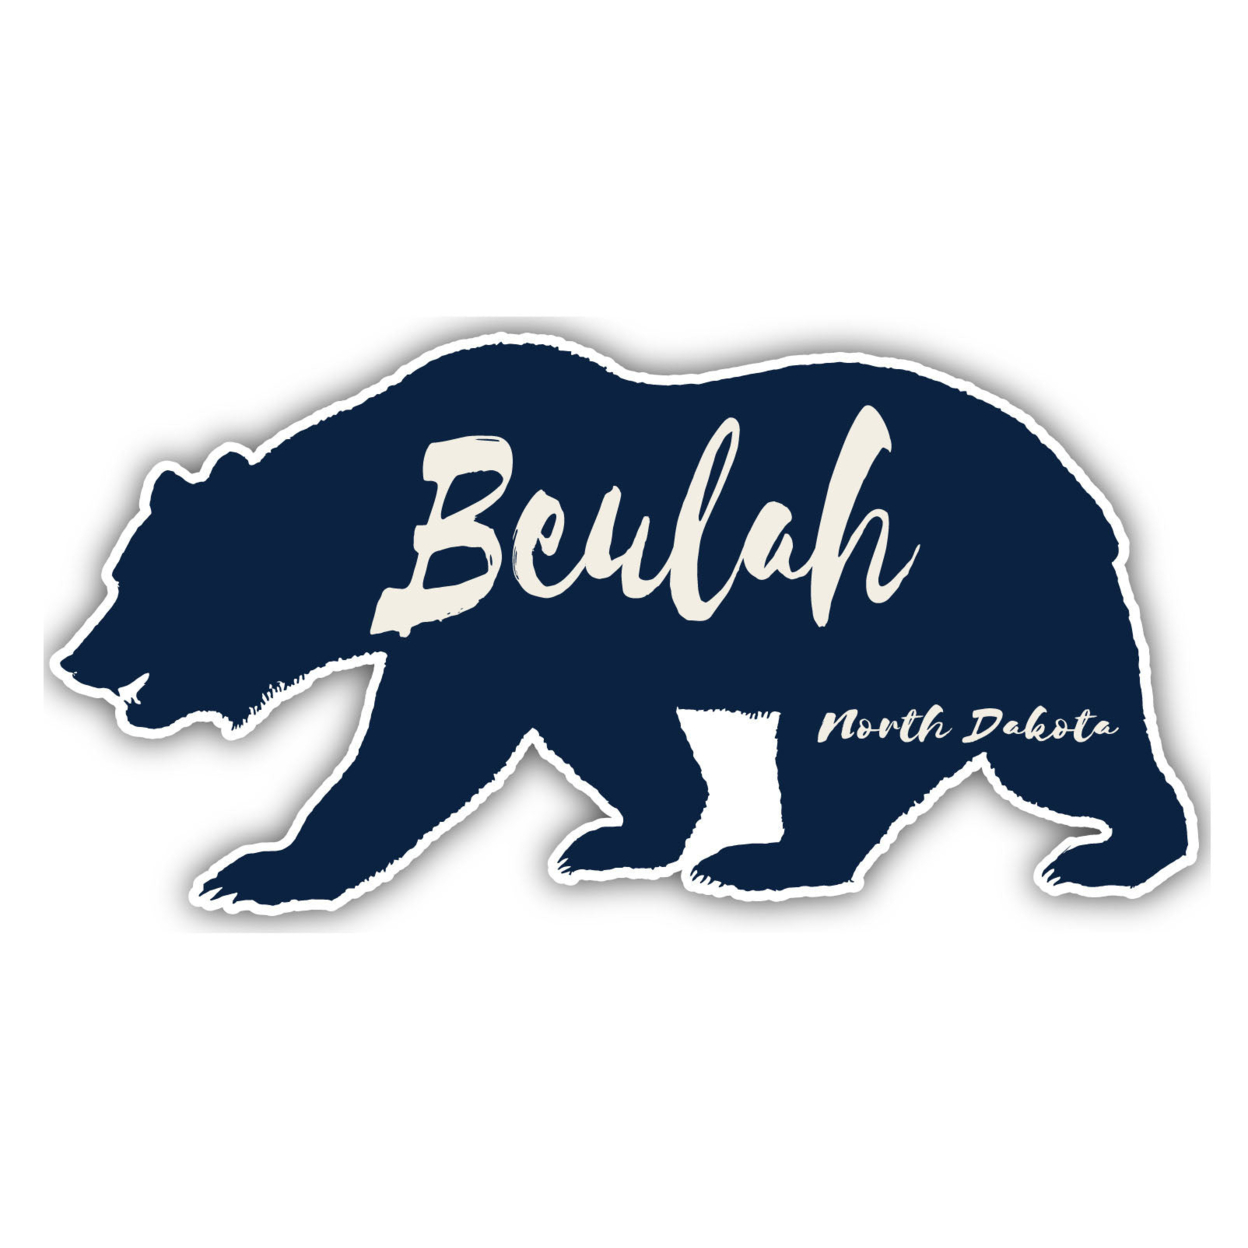 Beulah North Dakota Souvenir Decorative Stickers (Choose Theme And Size) - 4-Pack, 10-Inch, Great Outdoors